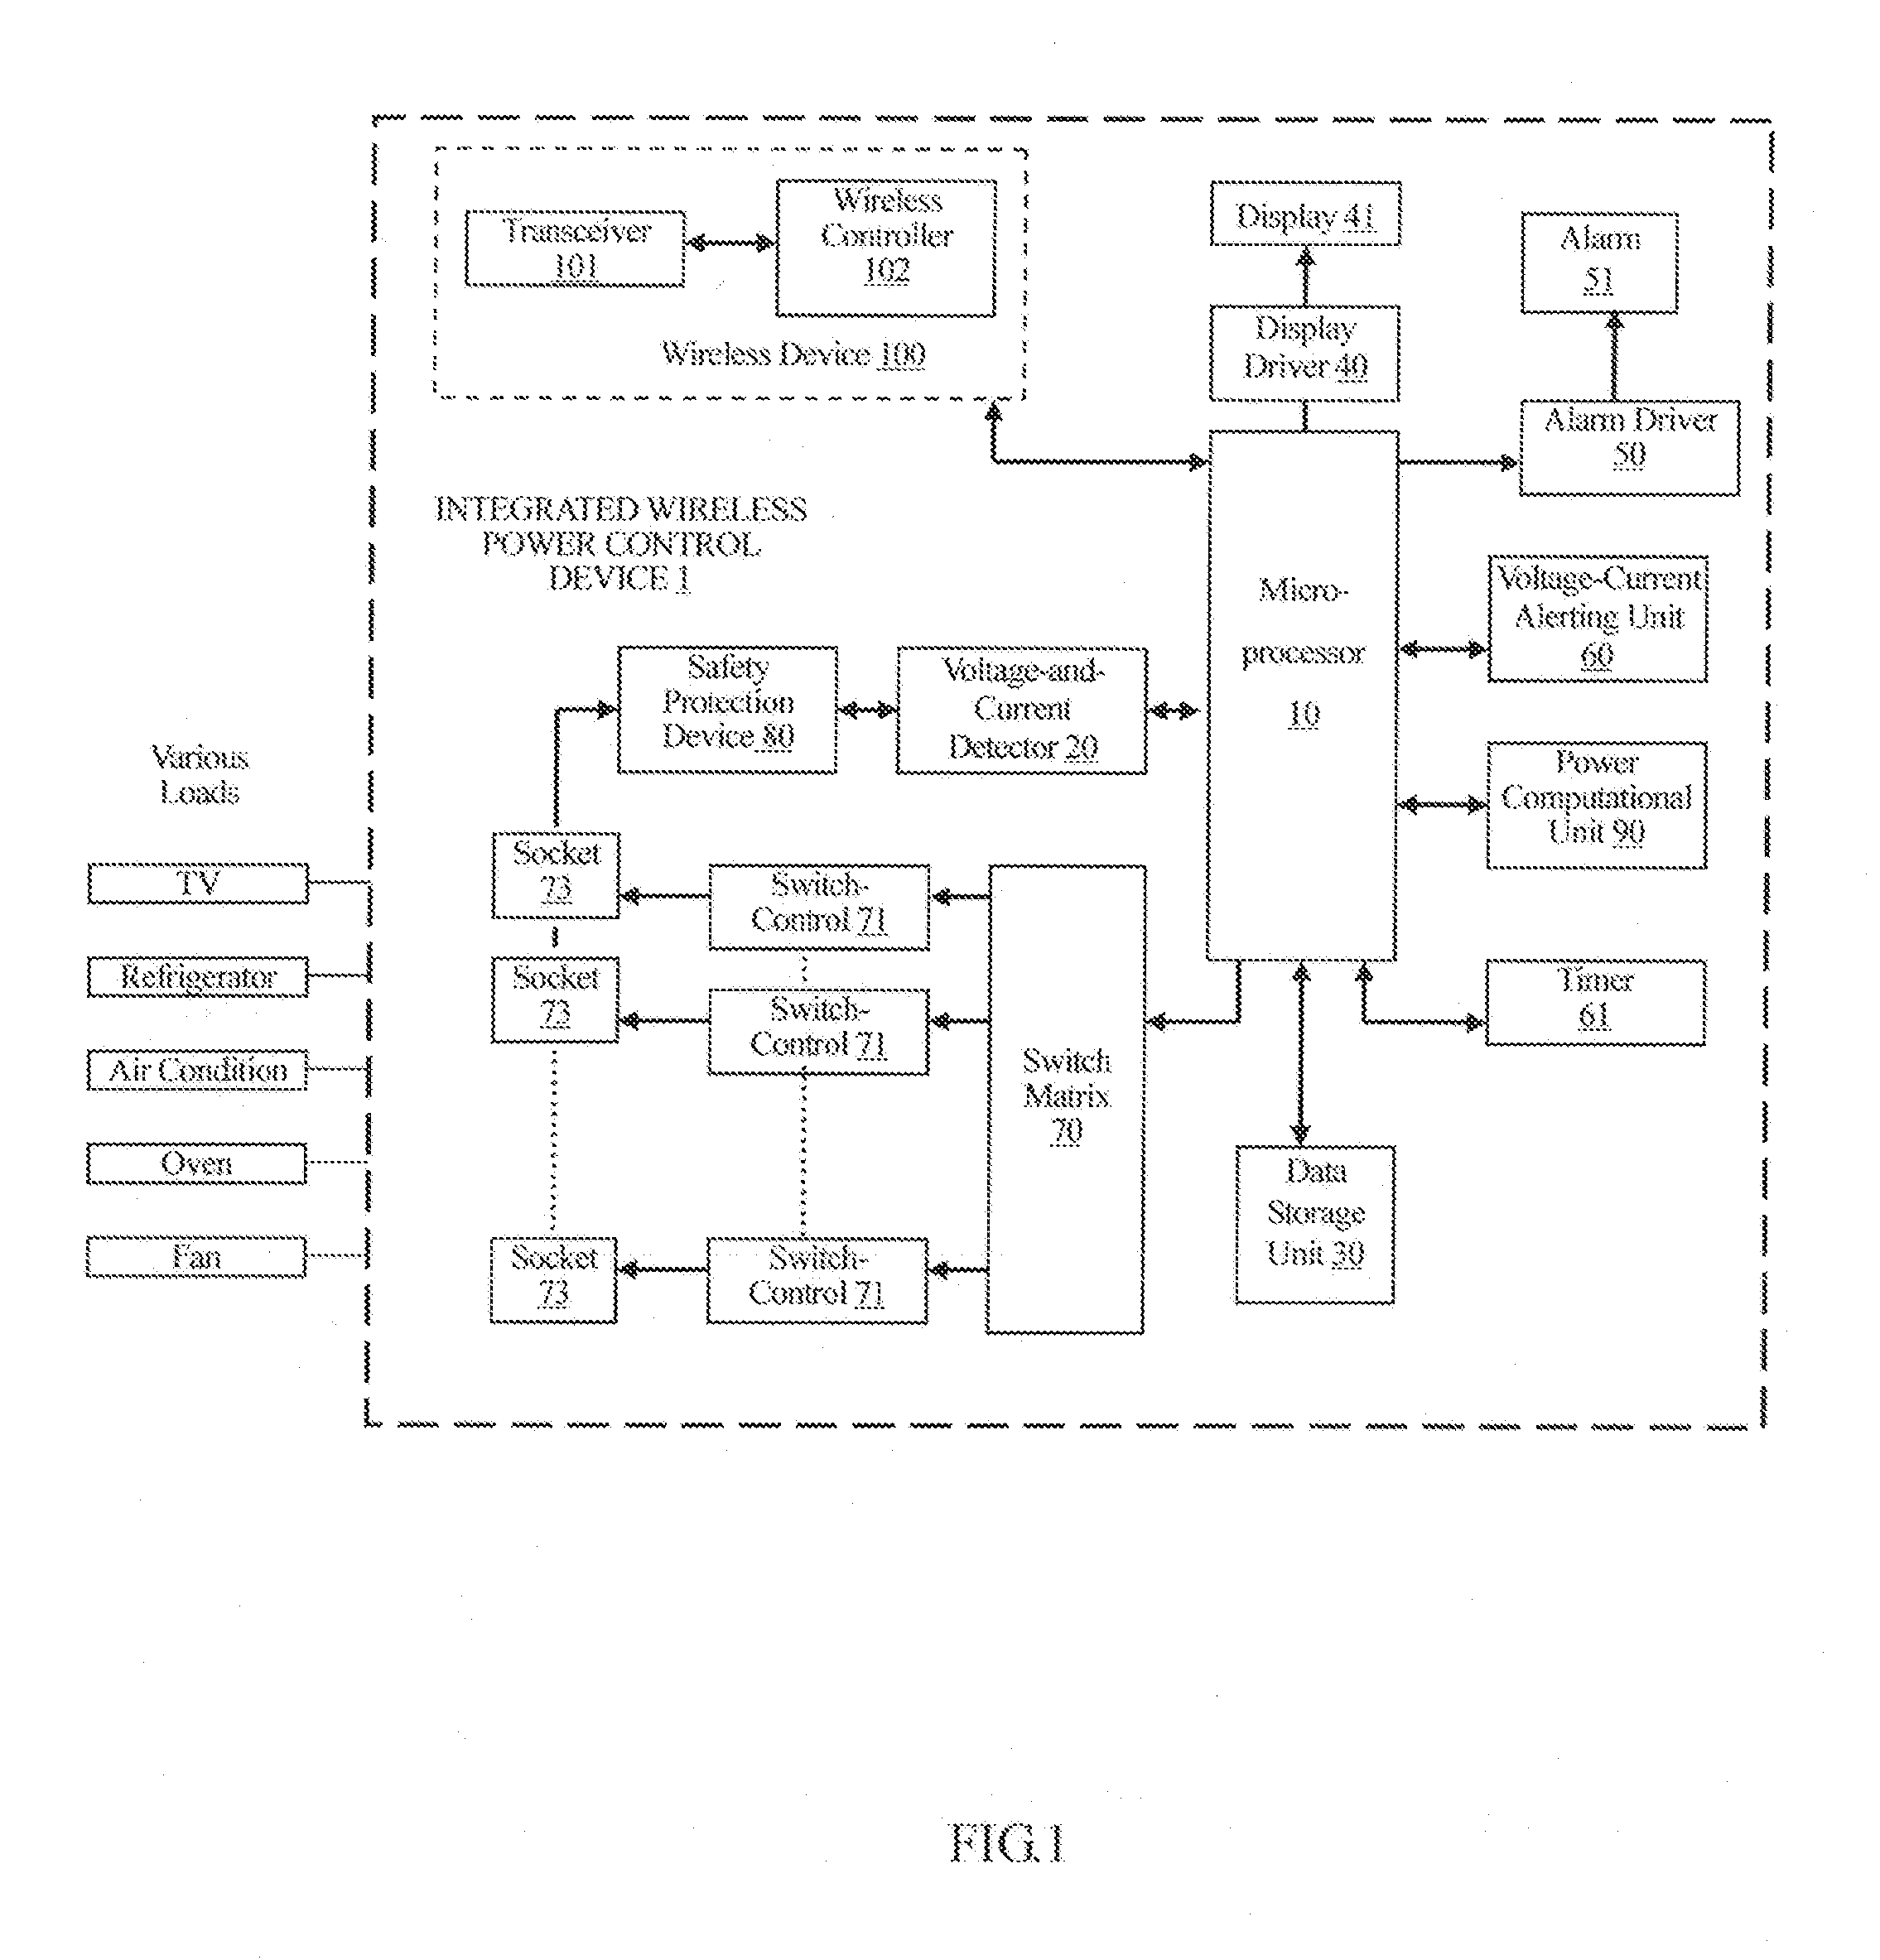 Integrated Wireless Power Control Device